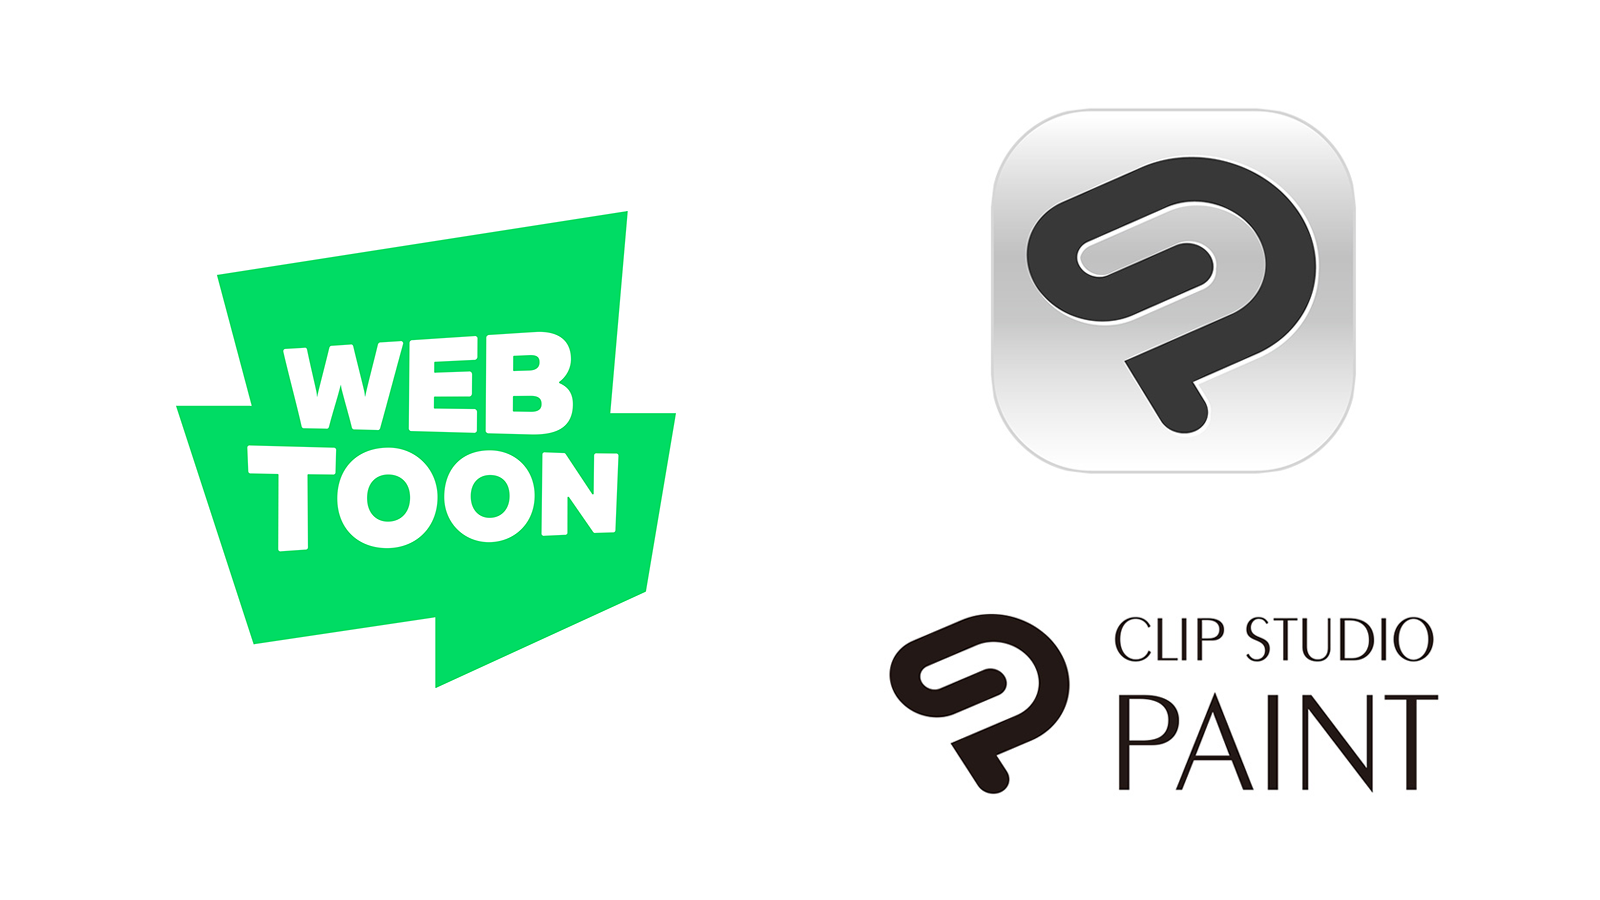 Celsys collaborates with WEBTOON Entertainment to bring Photoshop text layer export support to Clip Studio Paint